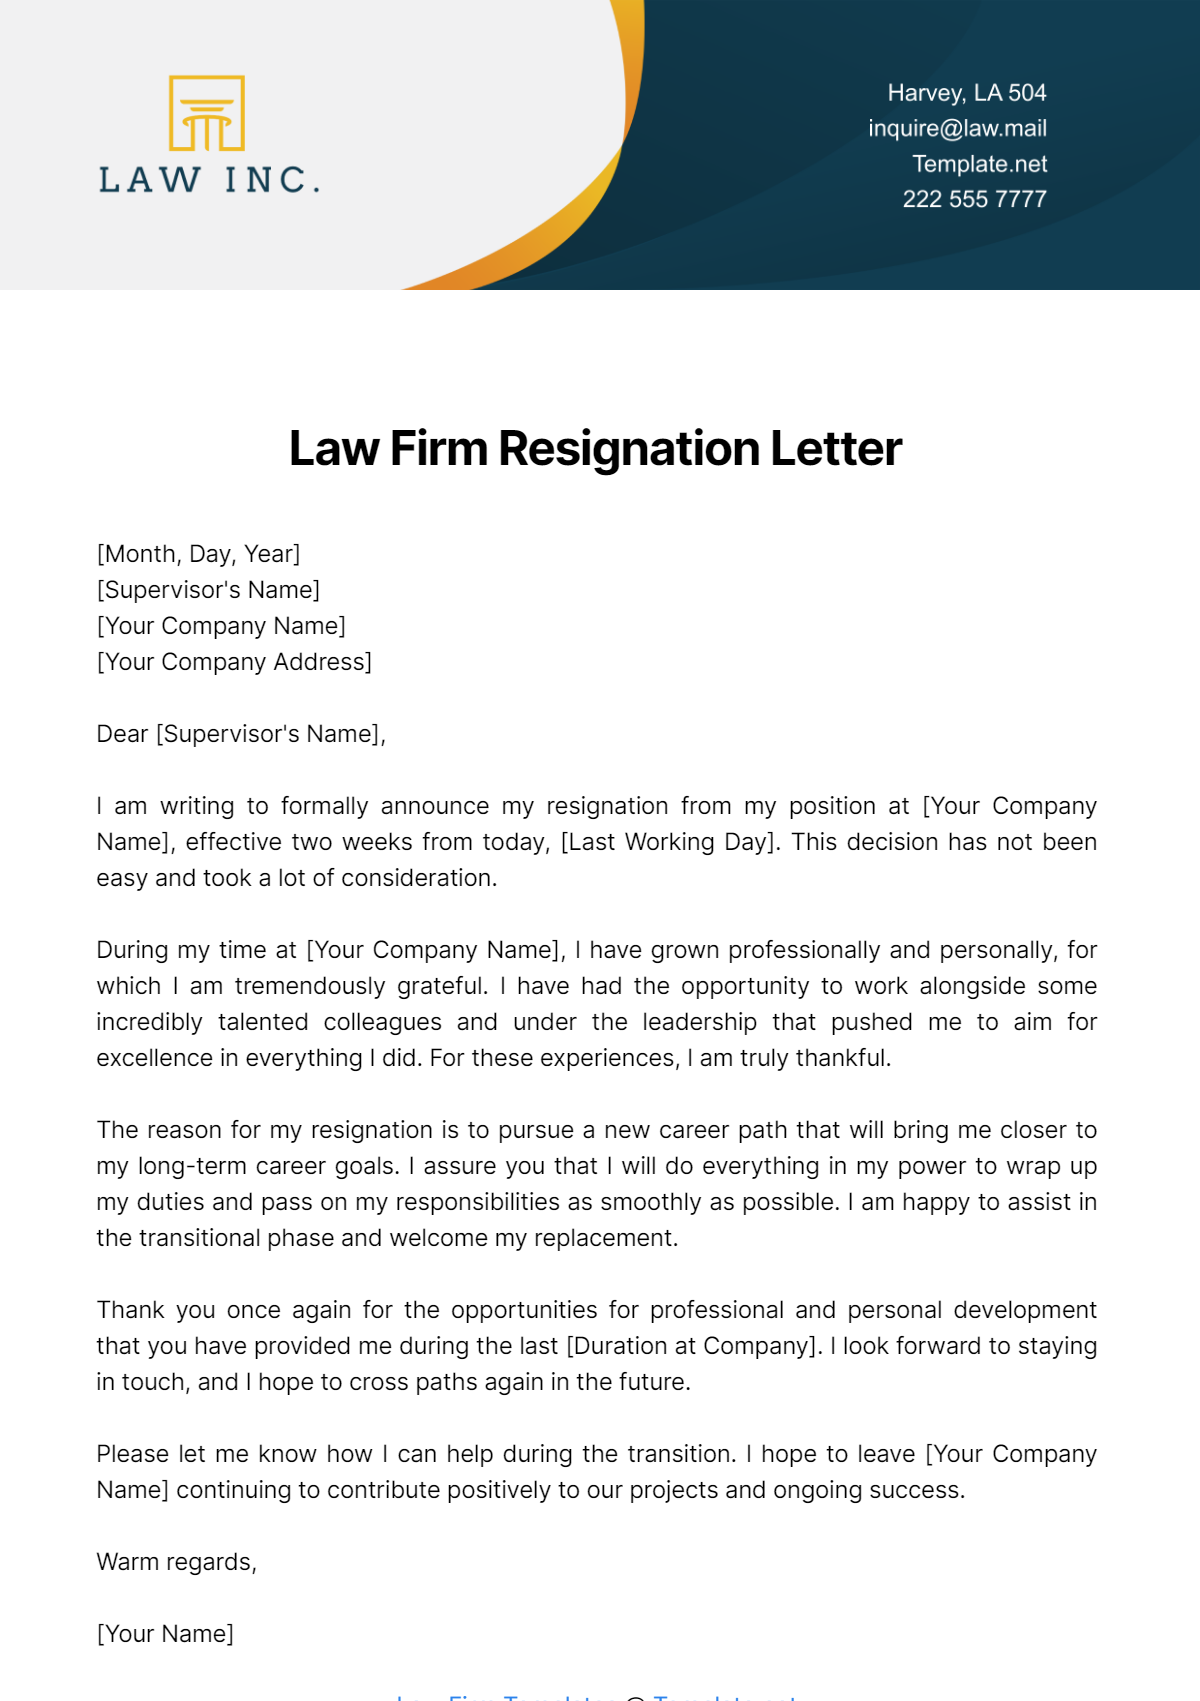 Law Firm Resignation Letter Template